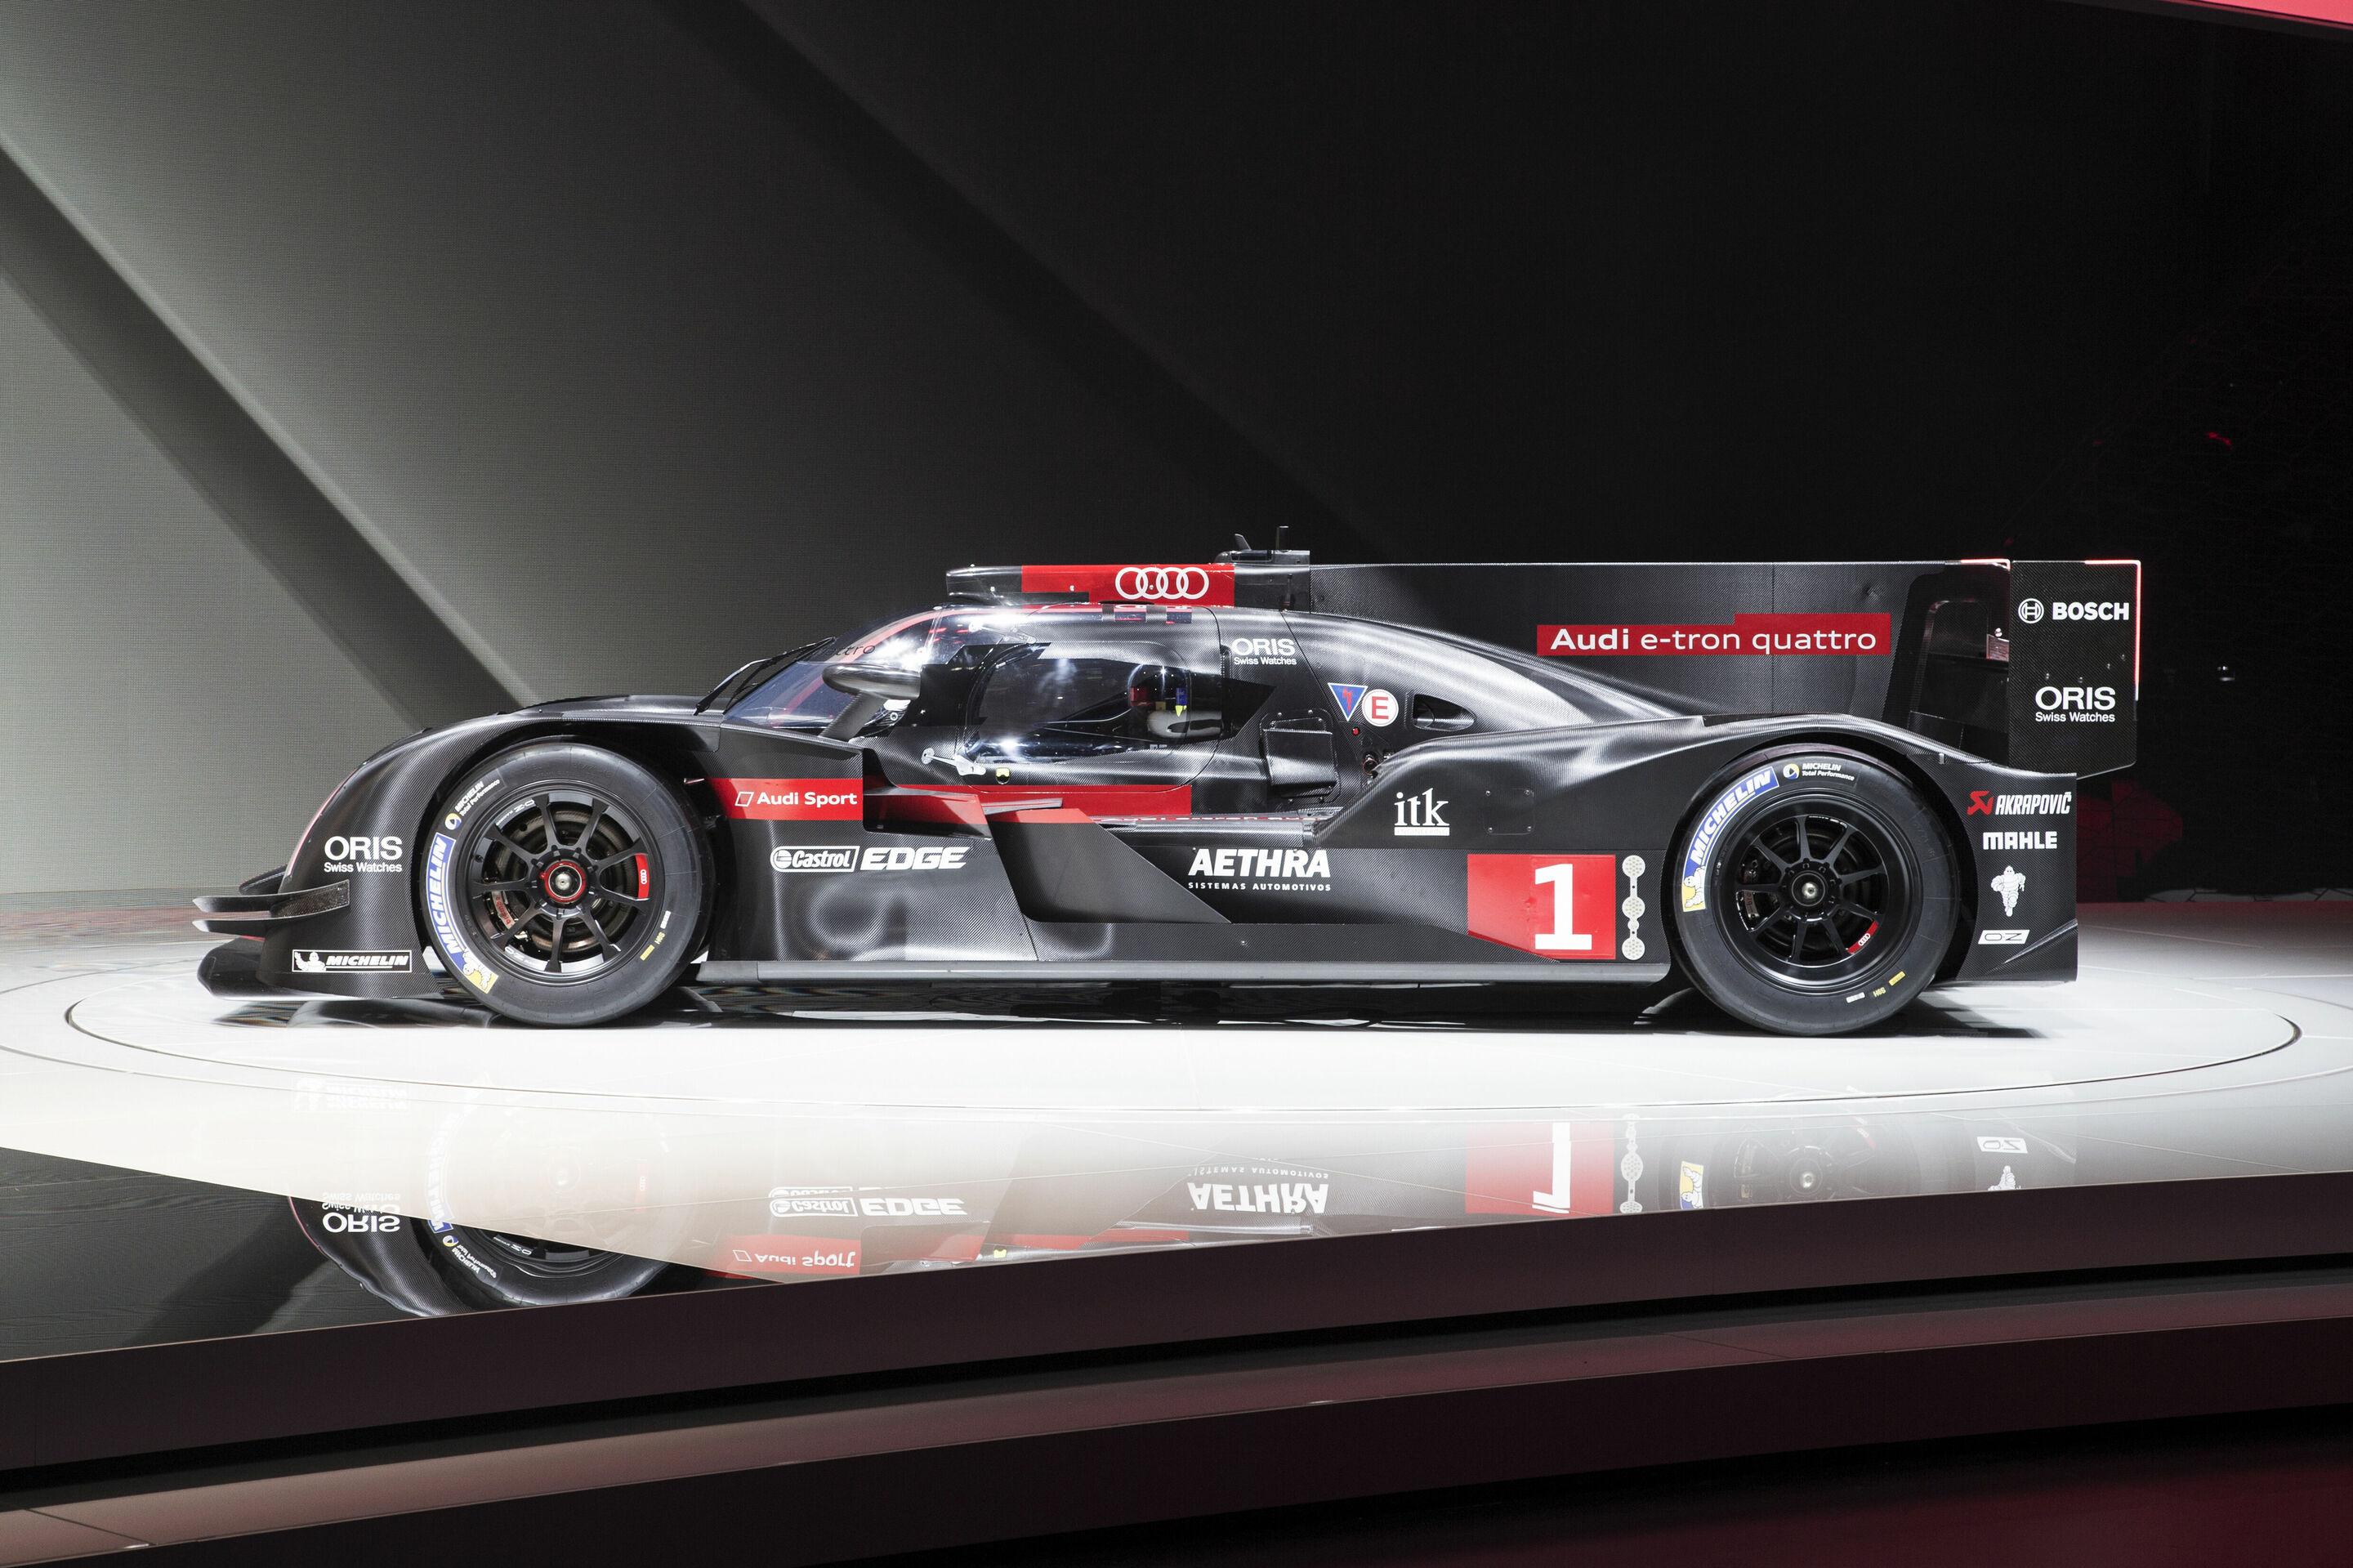 Audi Sport in 2014 again relies on strong partners in the FIA WEC